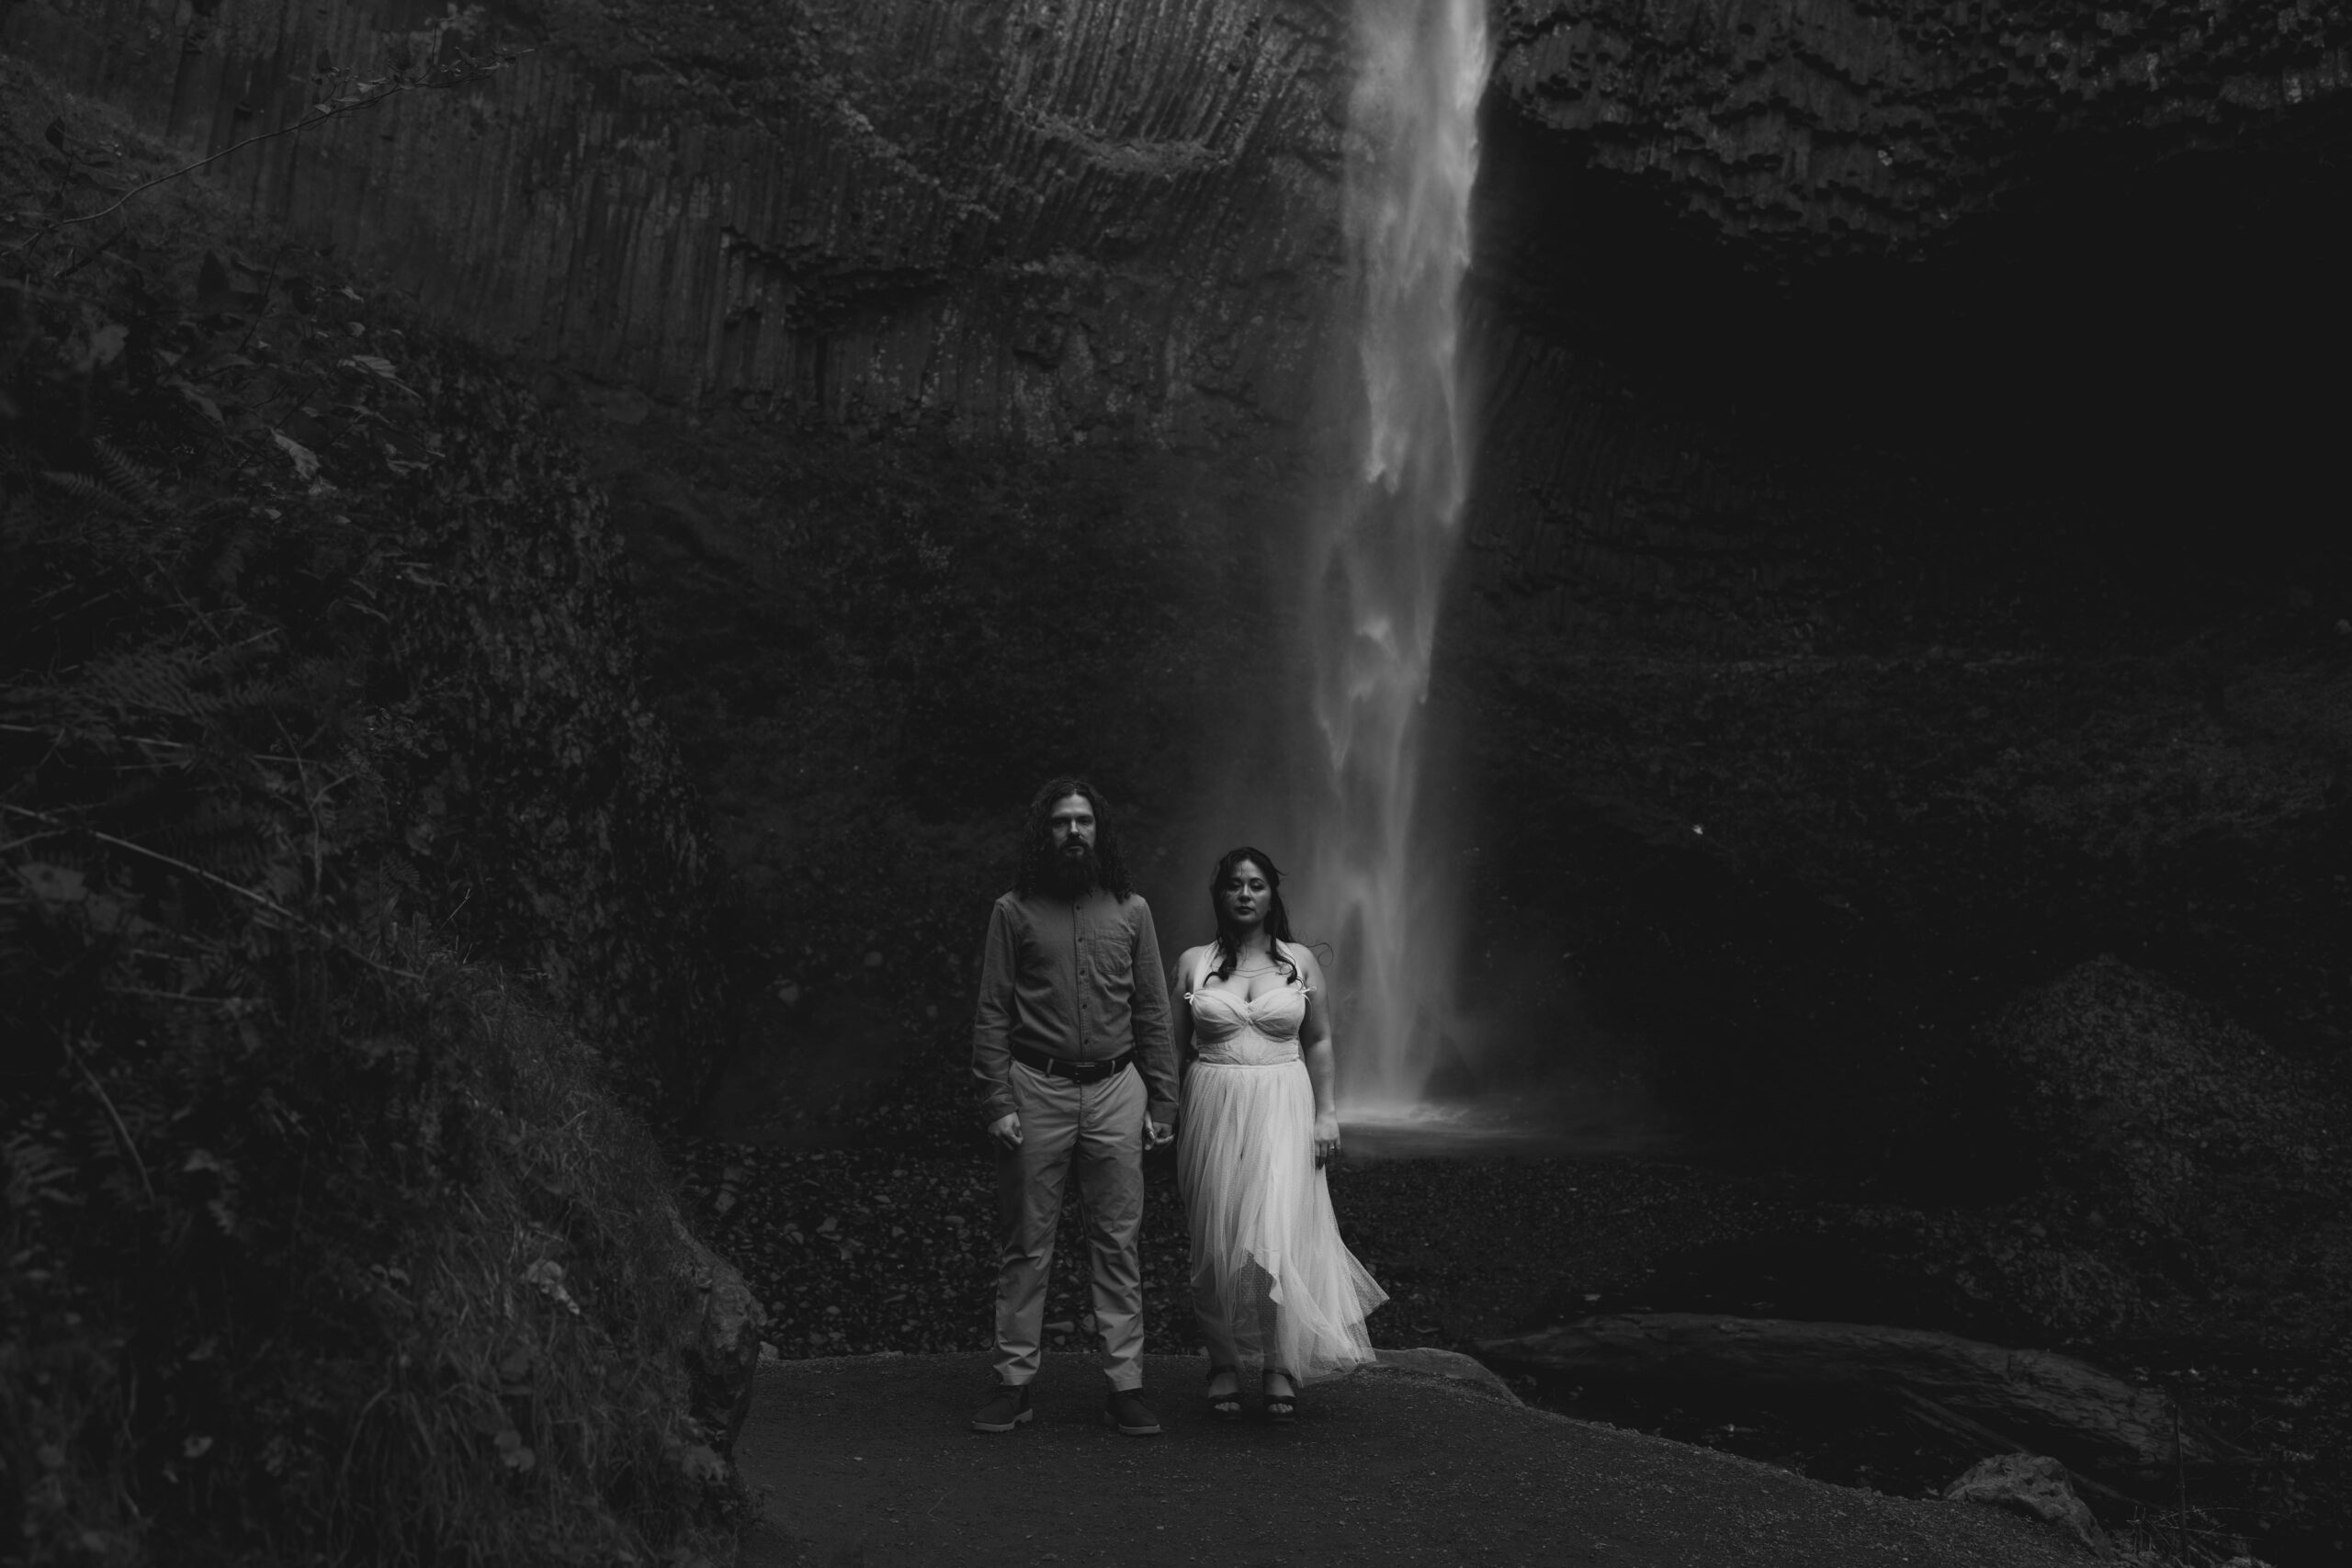 couple standing on pathway with waterfall in distance behind them in black and white